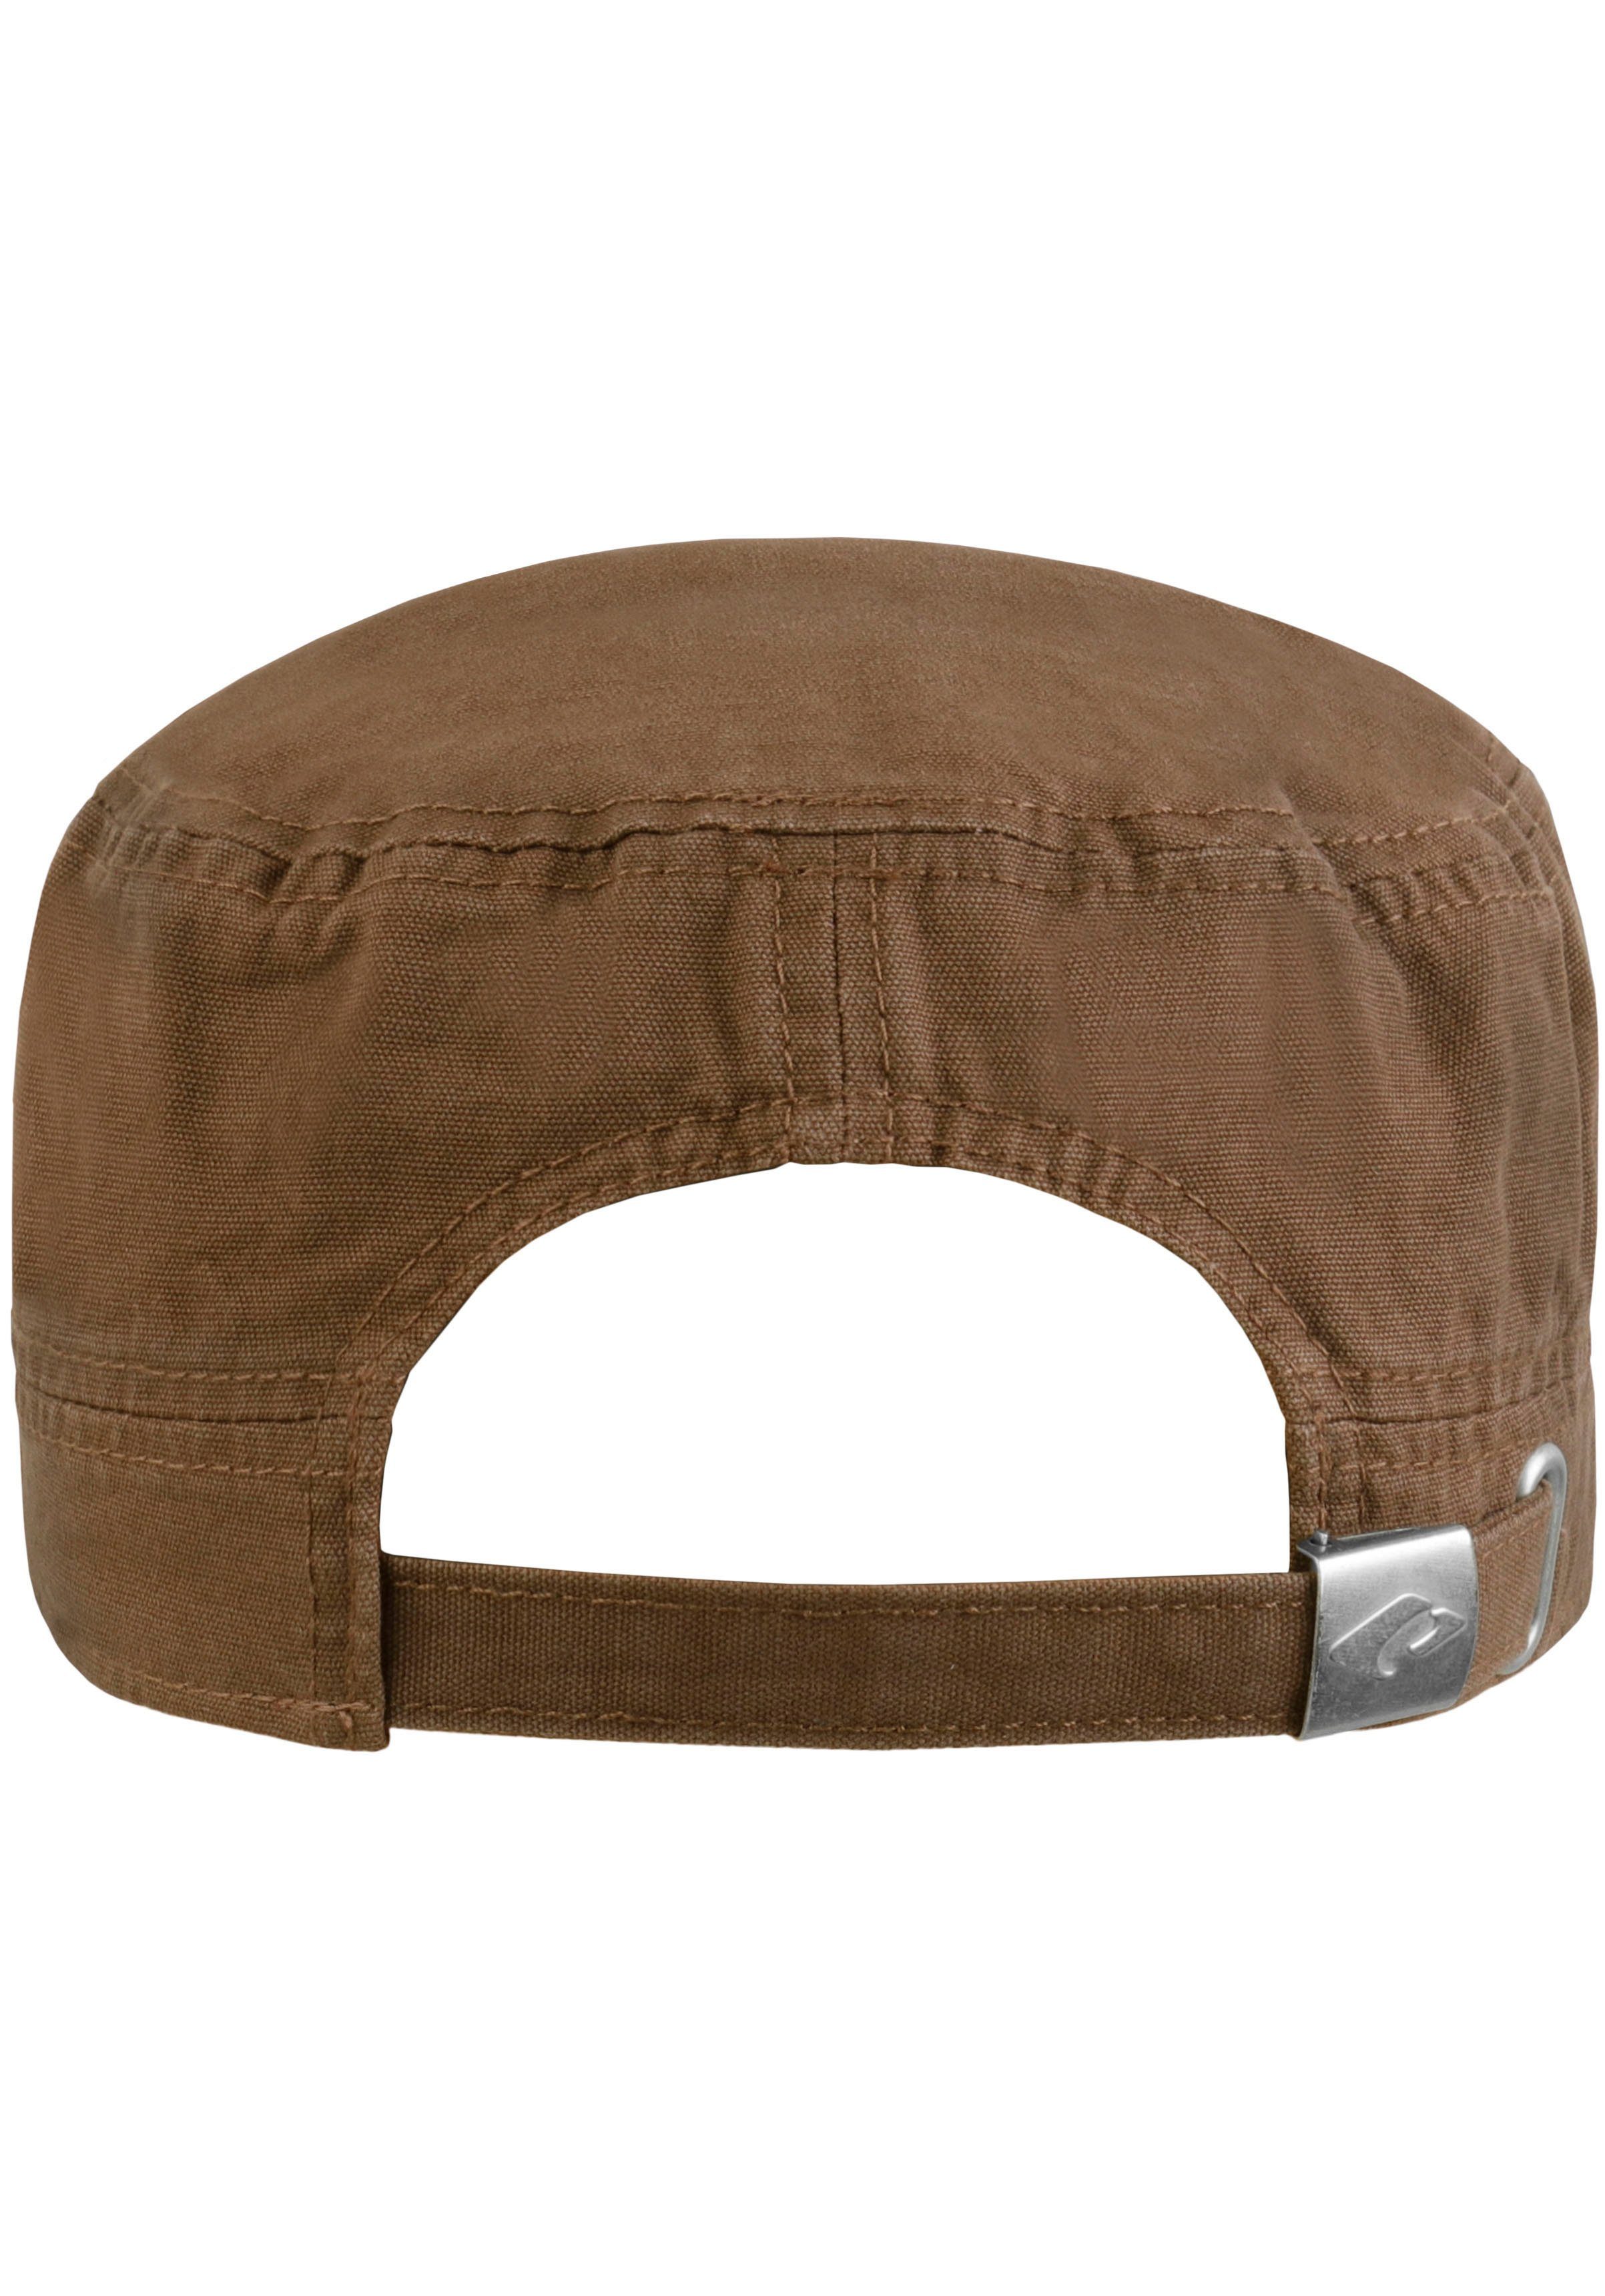 chillouts Army Dublin Mililtary-Style braun Cap im Hat Cap